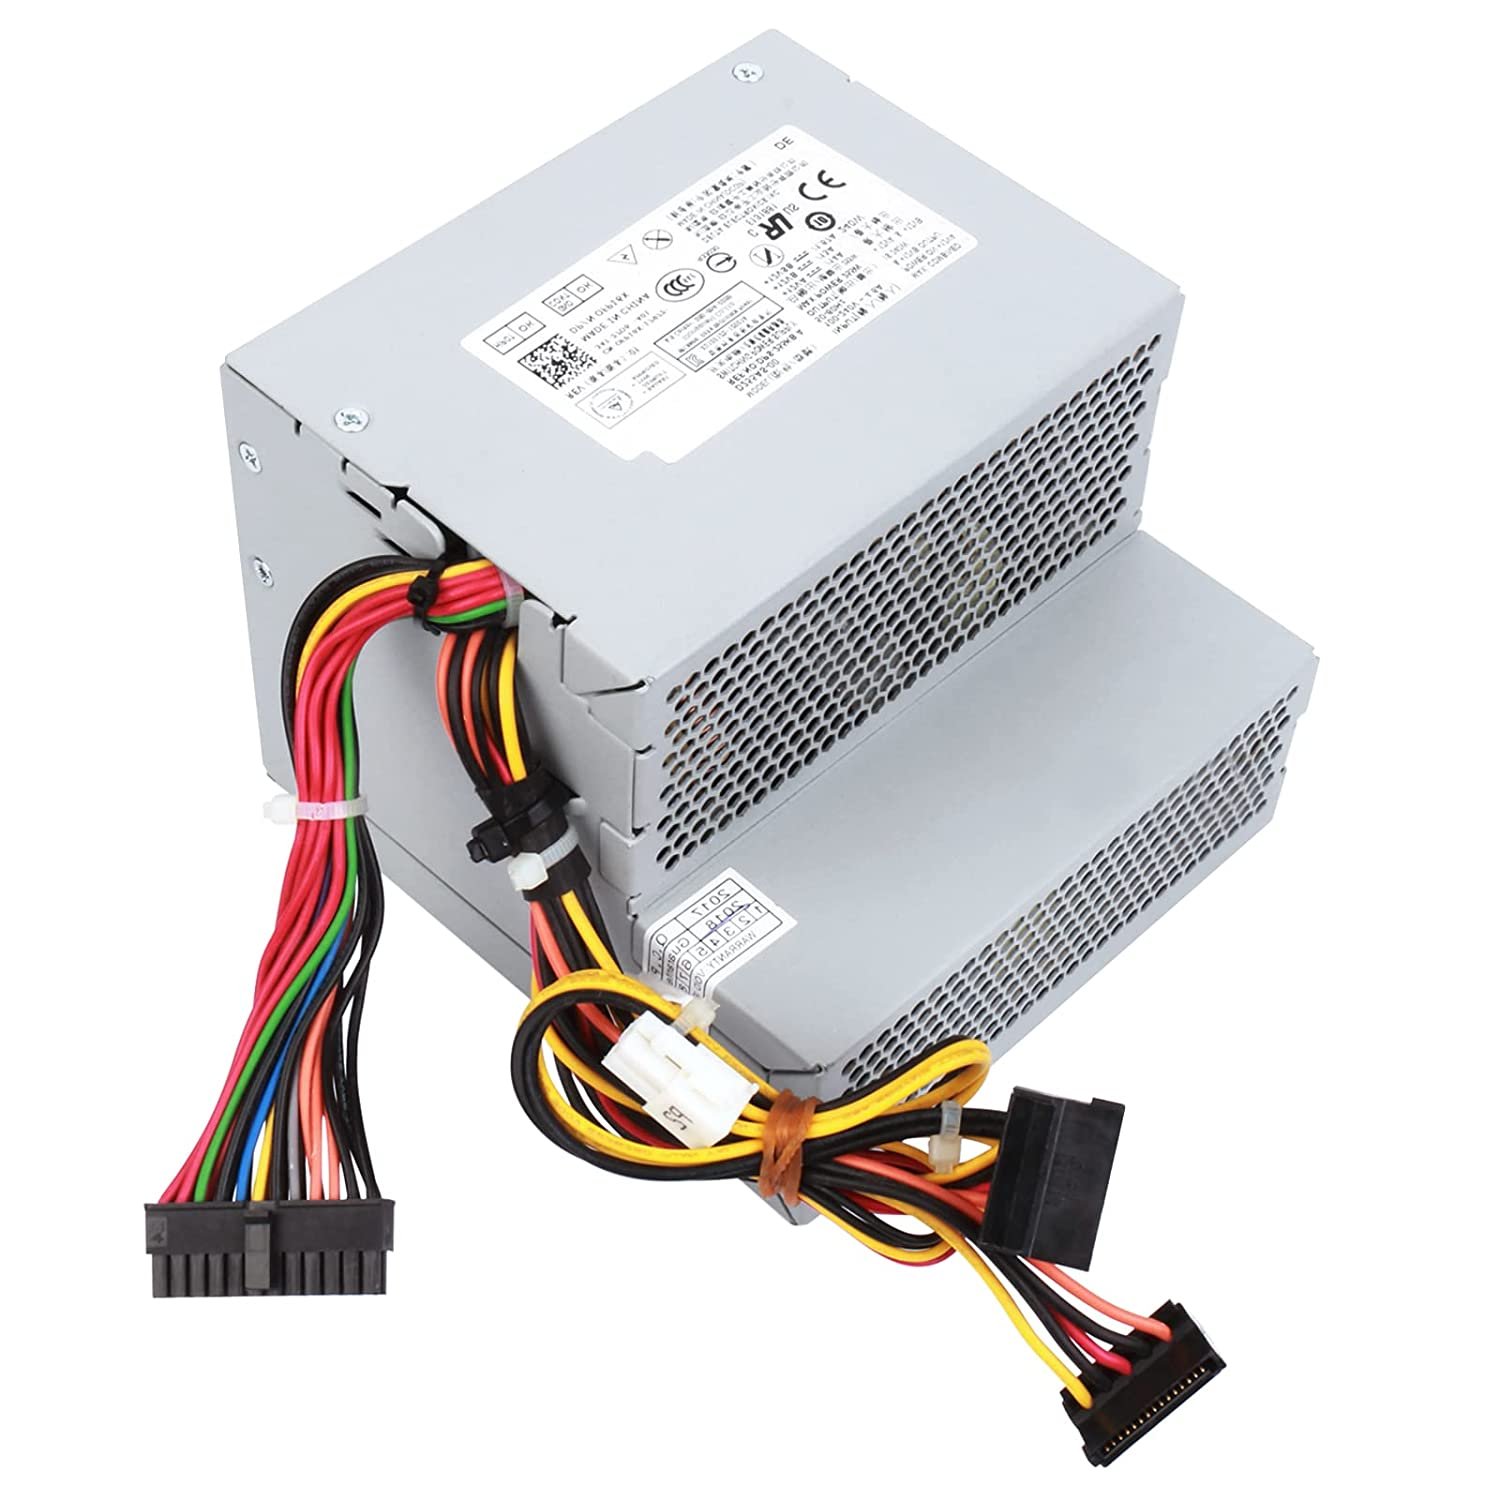 Upgraded New F255E-01 255W Power Supply Compatible With Dell Optiplex 580  760 780 960 980 Dt Psu R